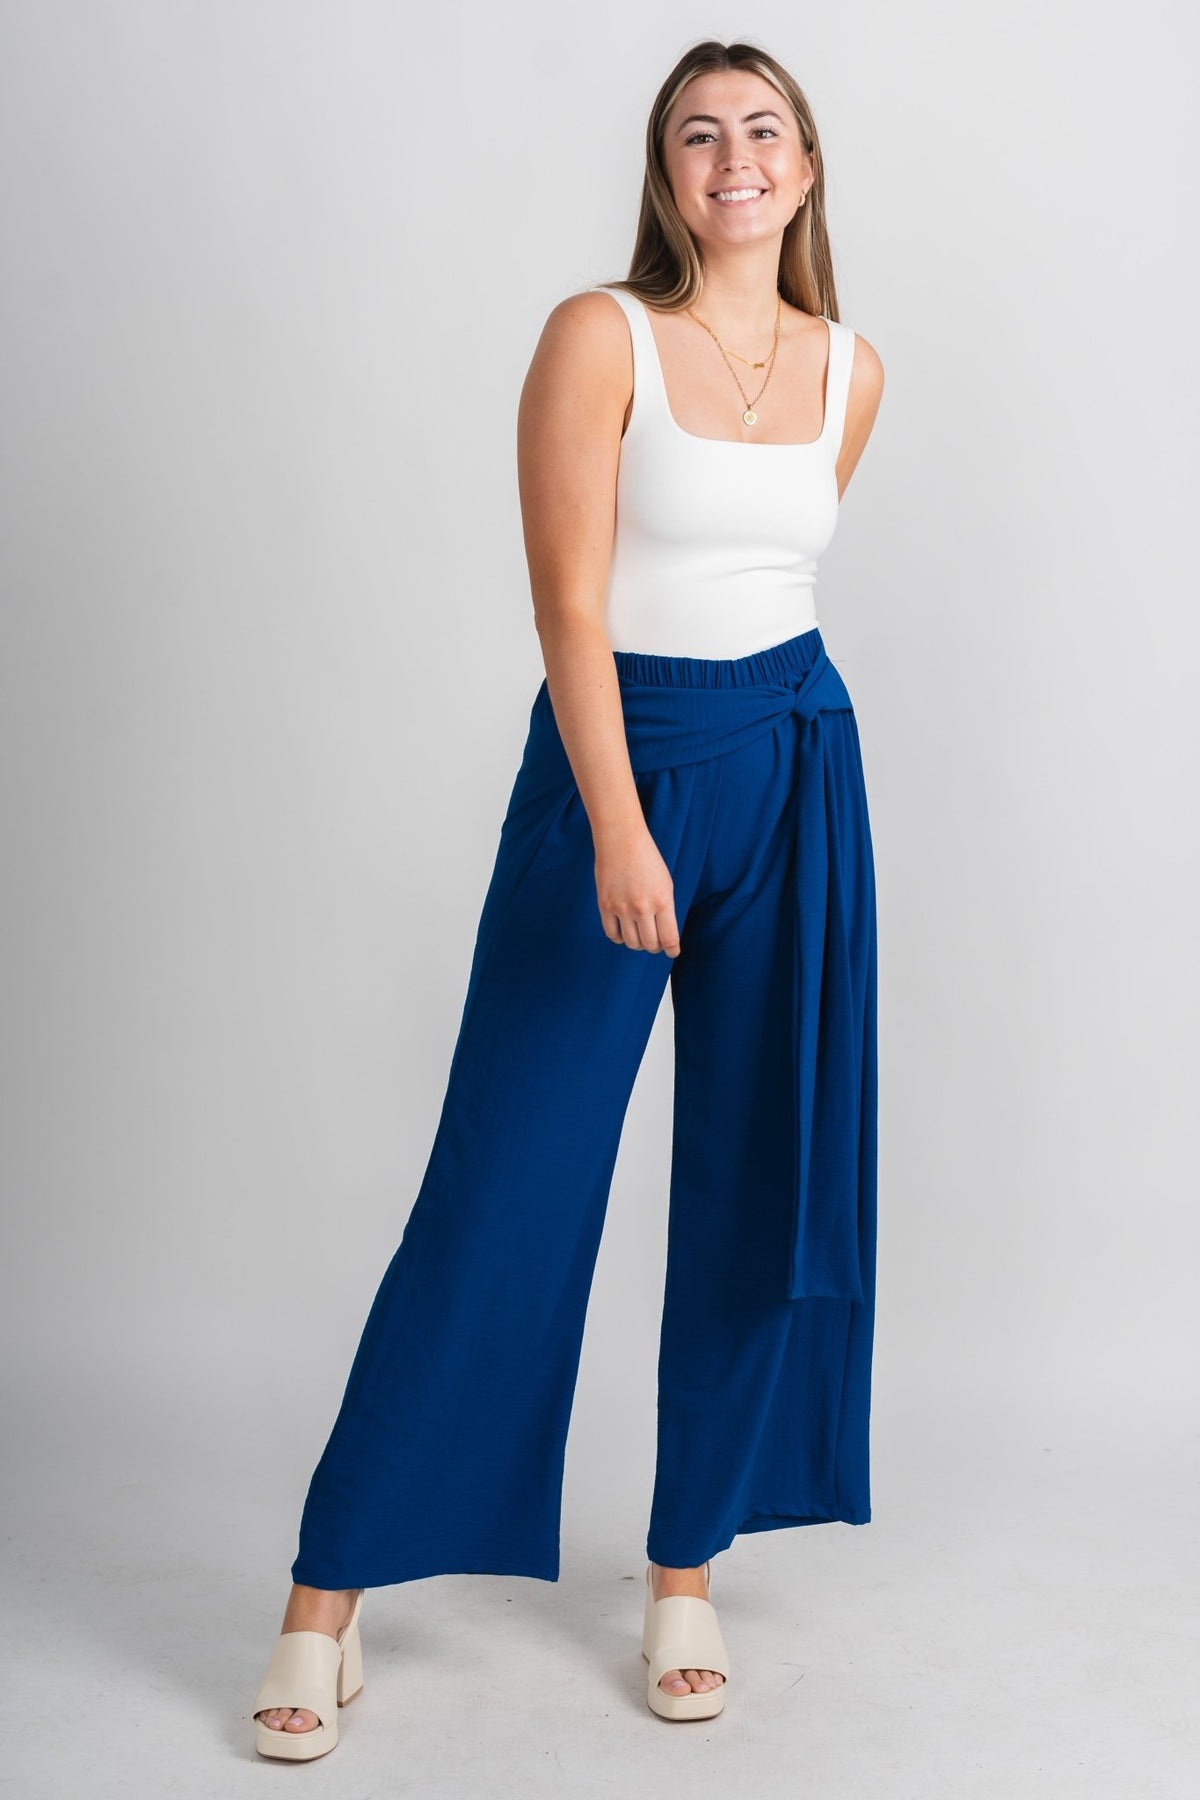 Tie waist wide leg pants royal blue - Trendy Pants - Cute Vacation Collection at Lush Fashion Lounge Boutique in Oklahoma City